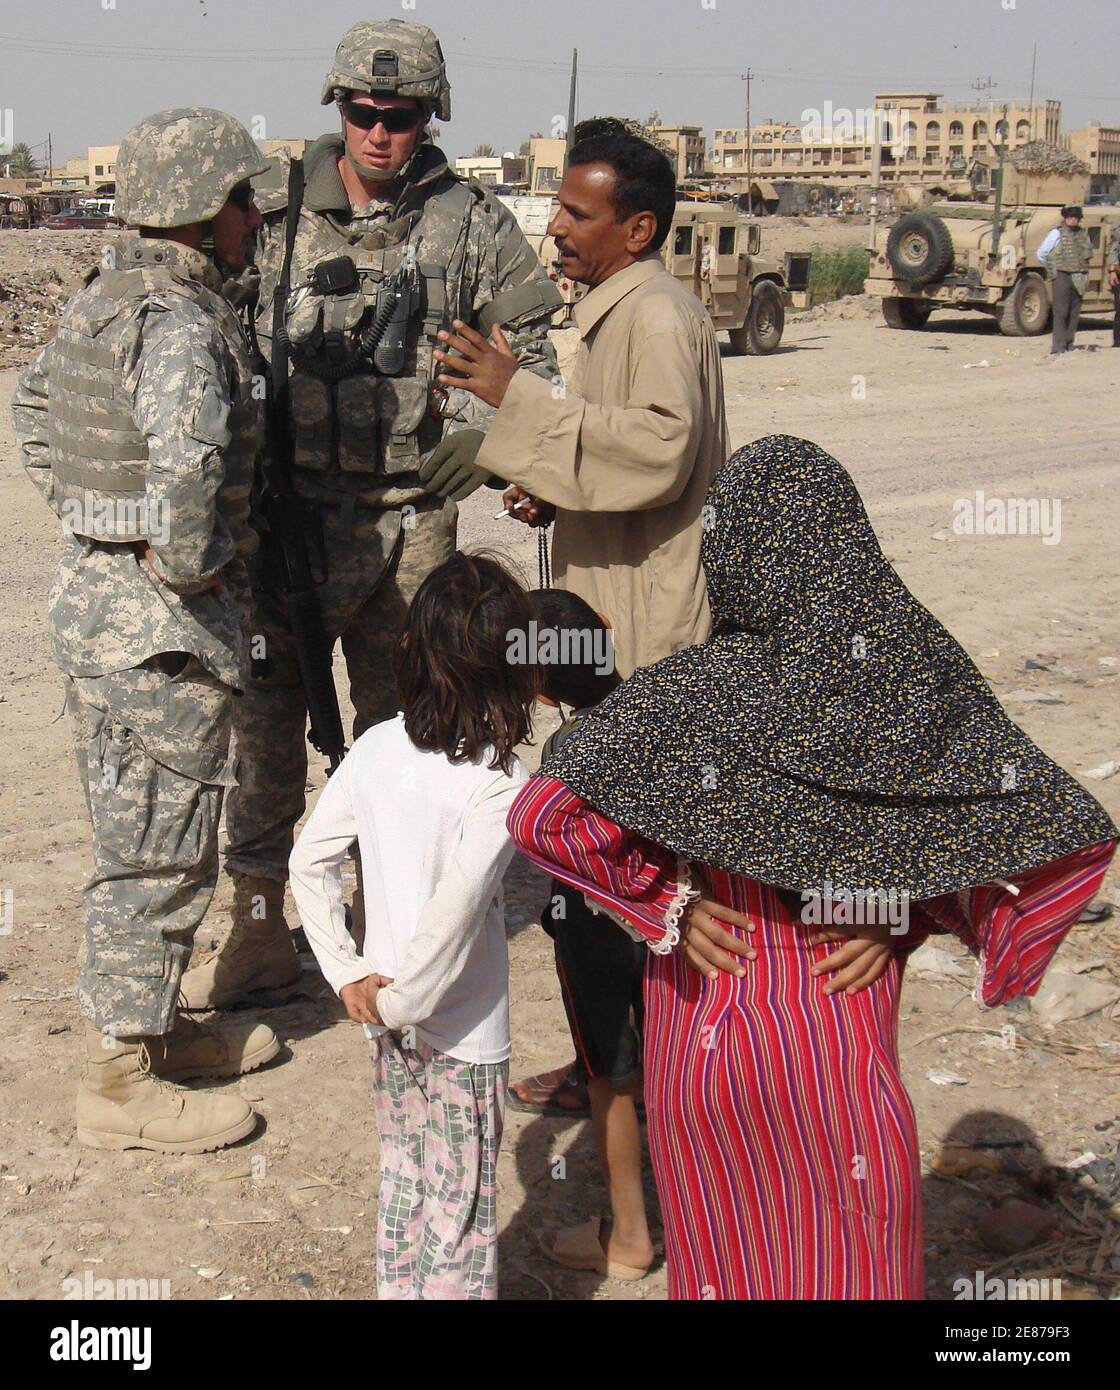 A resident talks to a U.S. soldier from 2nd Brigade combat team, 101st Airborne Division, through an interpreter in Baghdad's Shula district April 2, 2008. Picture taken April 2, 2008.      REUTERS/Yasser Faisal (IRAQ) Stock Photo